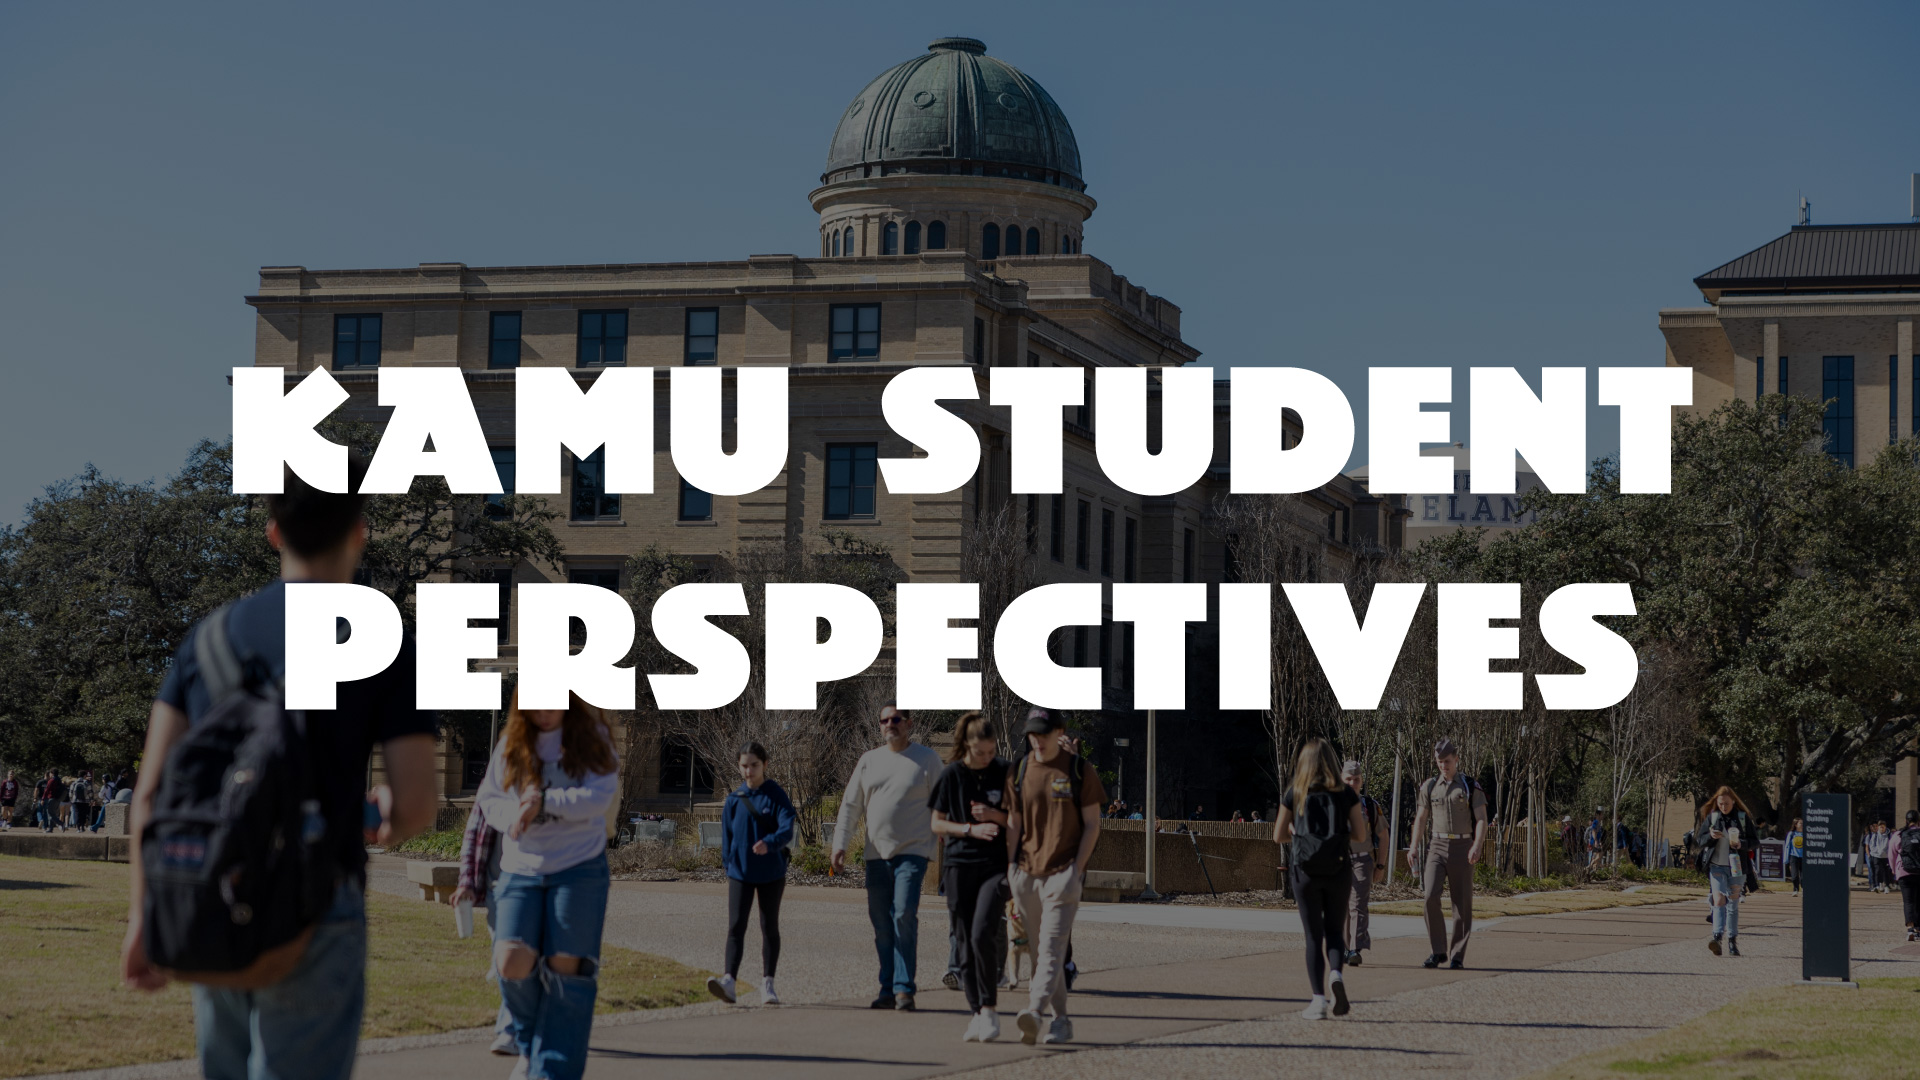 Text reading "KAMU Student Perspectives" over a background image of students walking in front of the Texas A&M University Academic Building